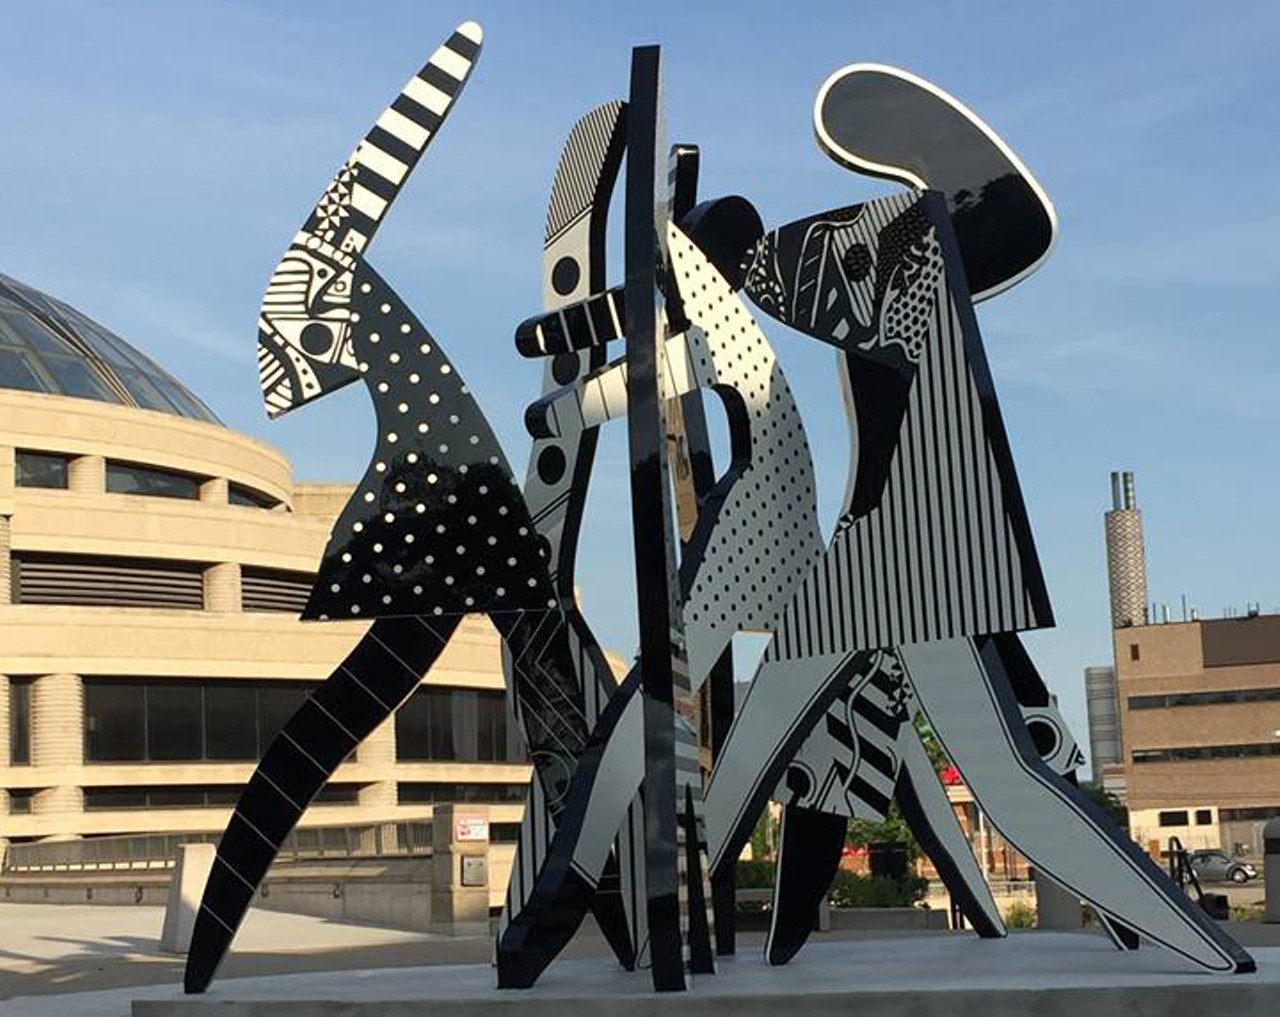 "United We Stand"
(315 E. Warren Ave., Detroit)
Detroit artist Charles McGee debuted this 20-foot-by-20-foot sculpture outside the Charles H. Wright Museum of African American History in 2016. The abstracted black-and-white forms are meant to signify the 50th anniversary of the infamous 1967 civil disturbance in Detroit. (Courtesy of Charles McGee's Facebook page)